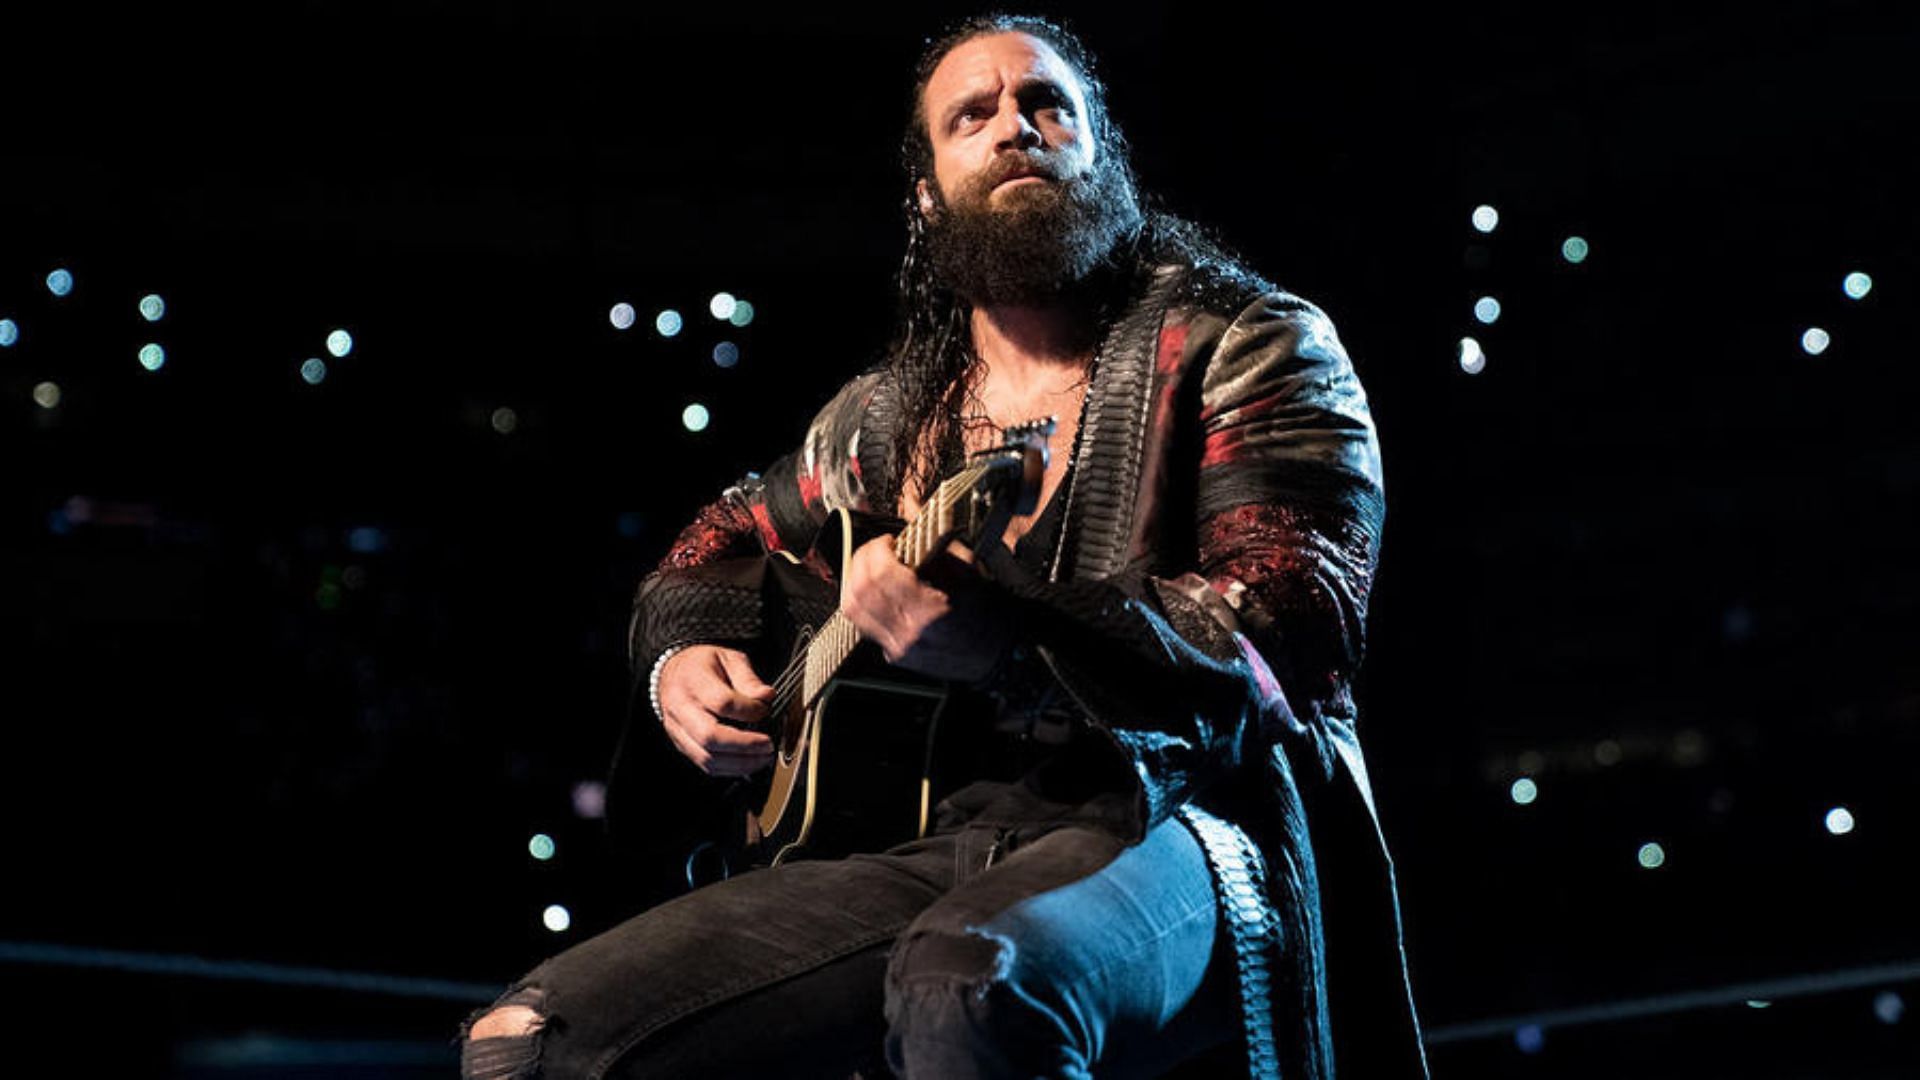 WWE RAW Superstar Elias has not been seen for a while